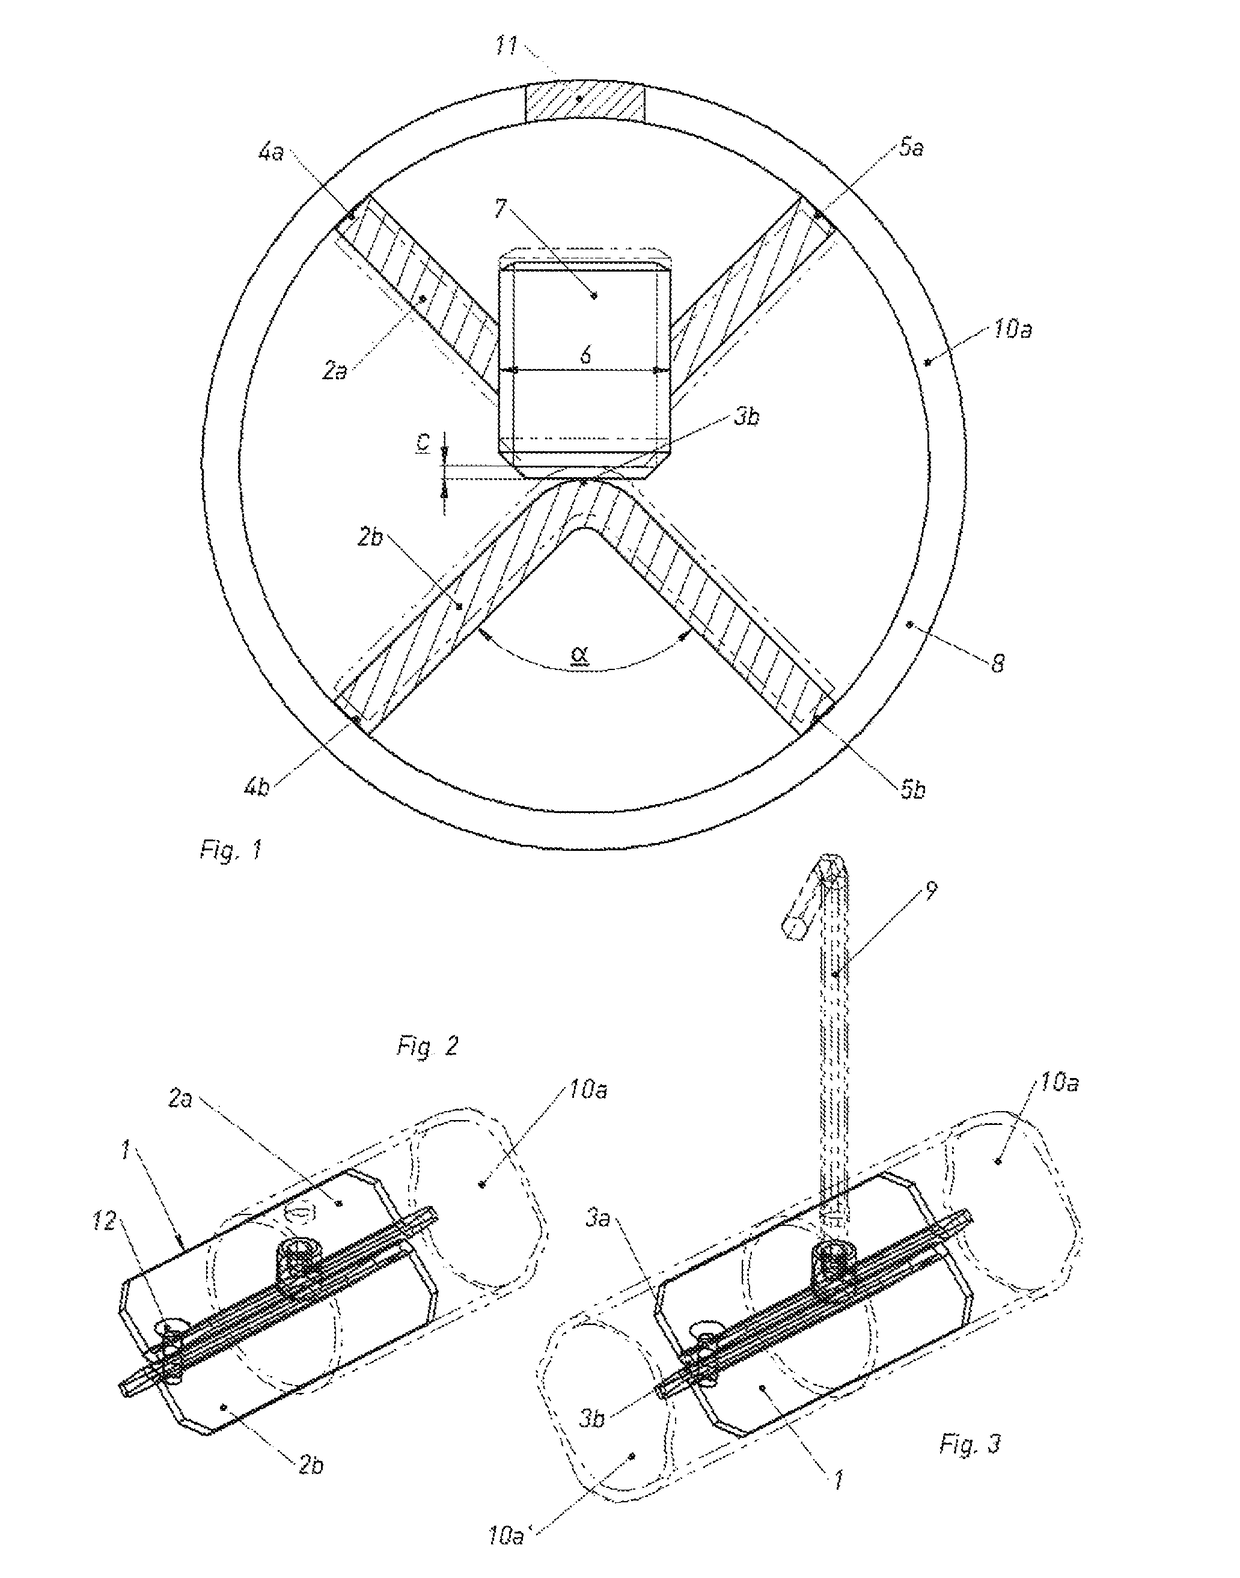 Connection device for tubular elements